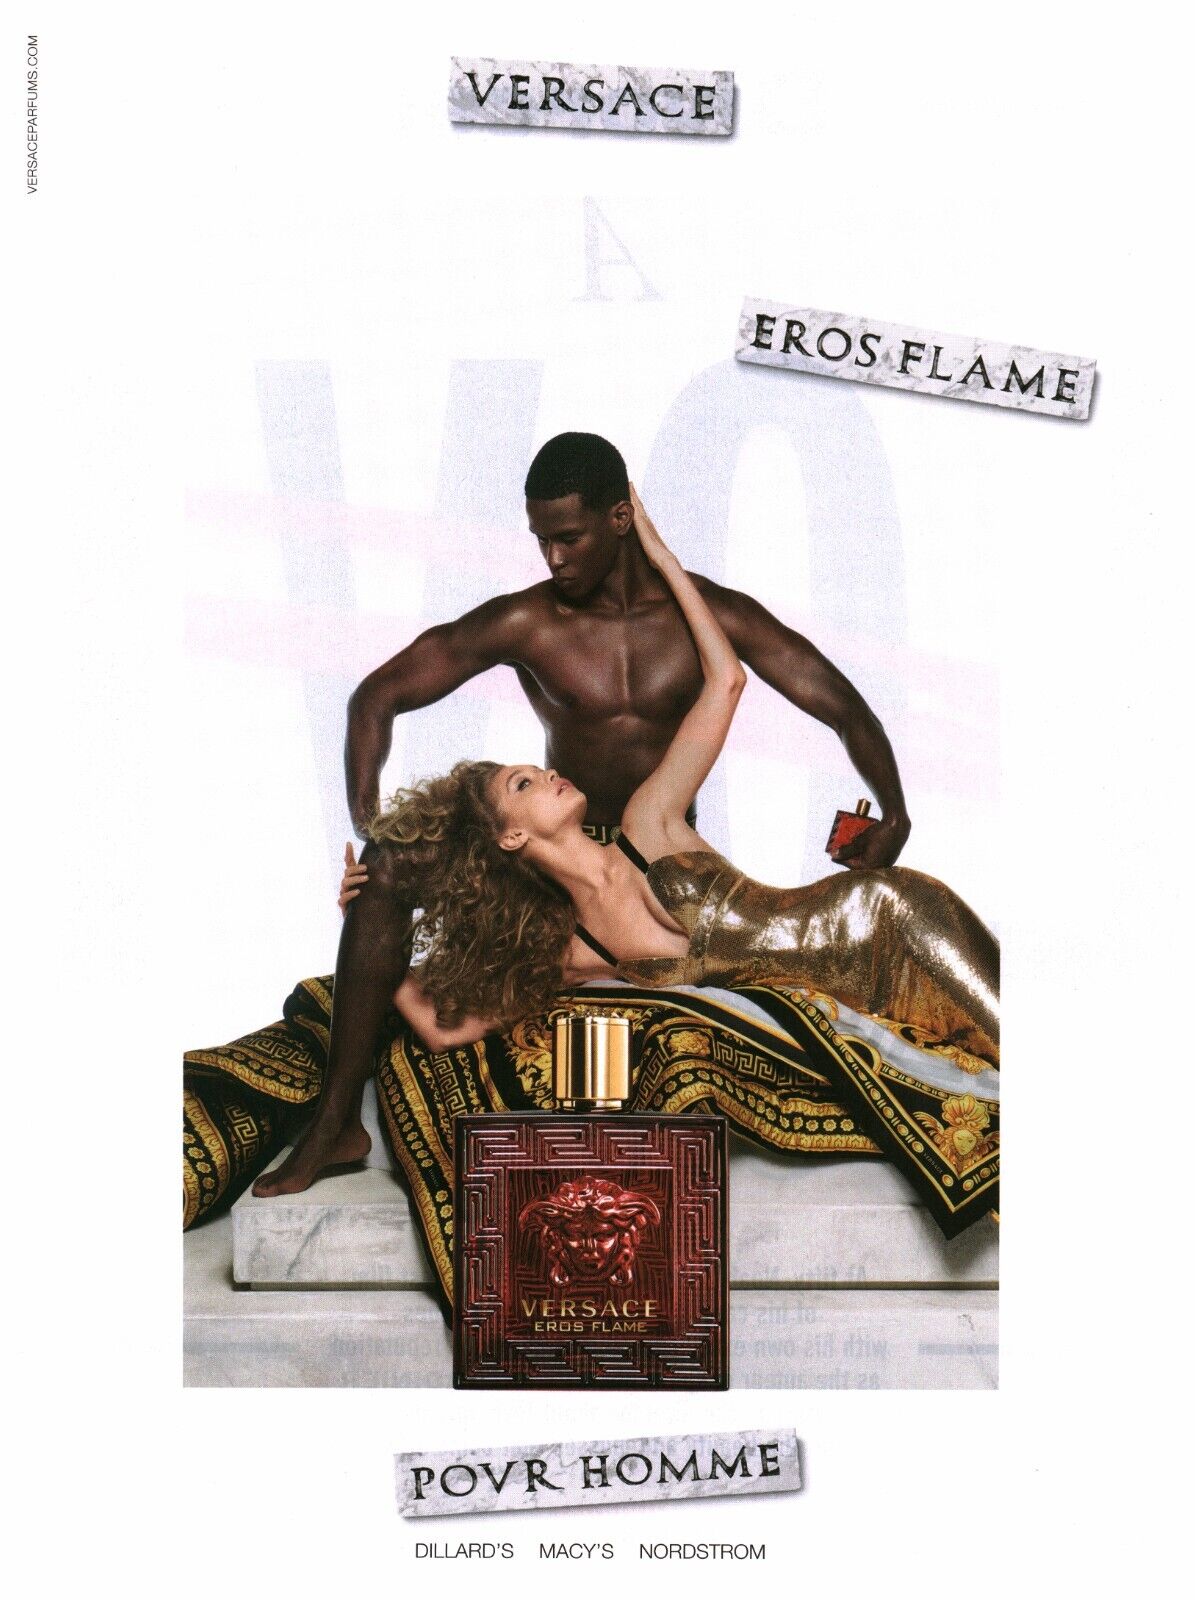 2019  PRINT AD - VERSACE  AD..  VERSACE EROS FLAME POVR HOMME AD....AD ONLY...